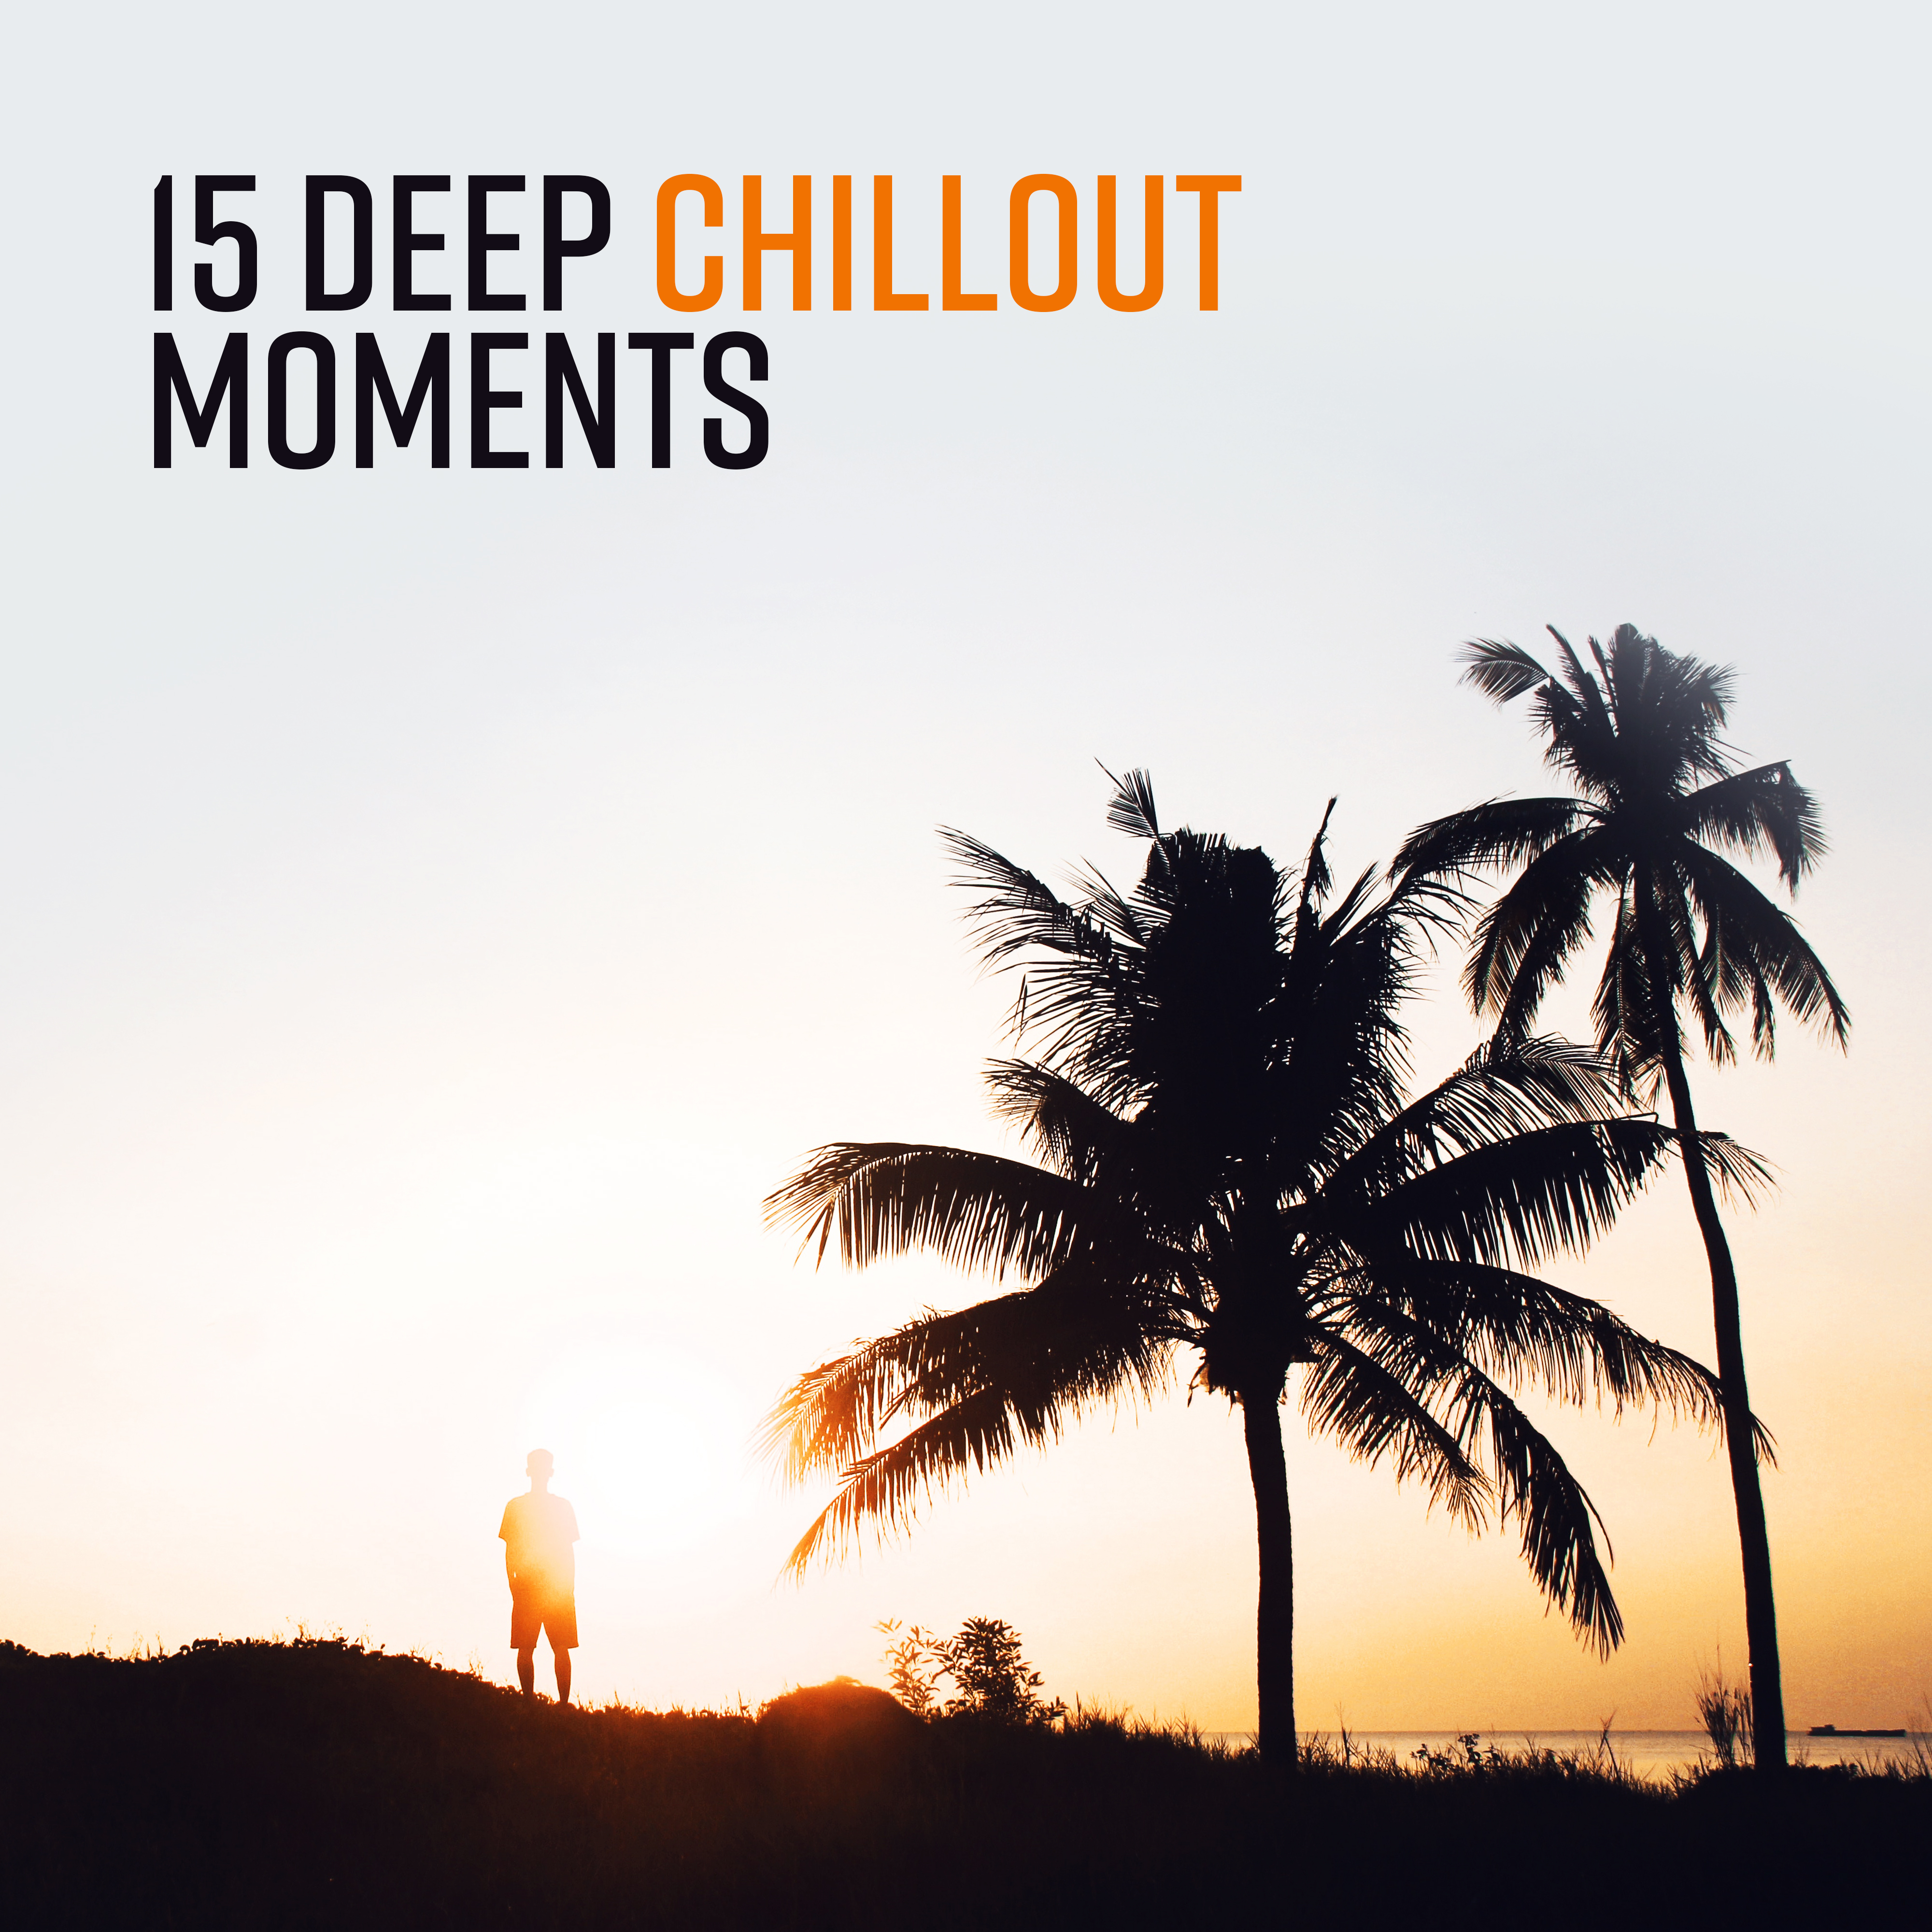 15 Deep Chillout Moments